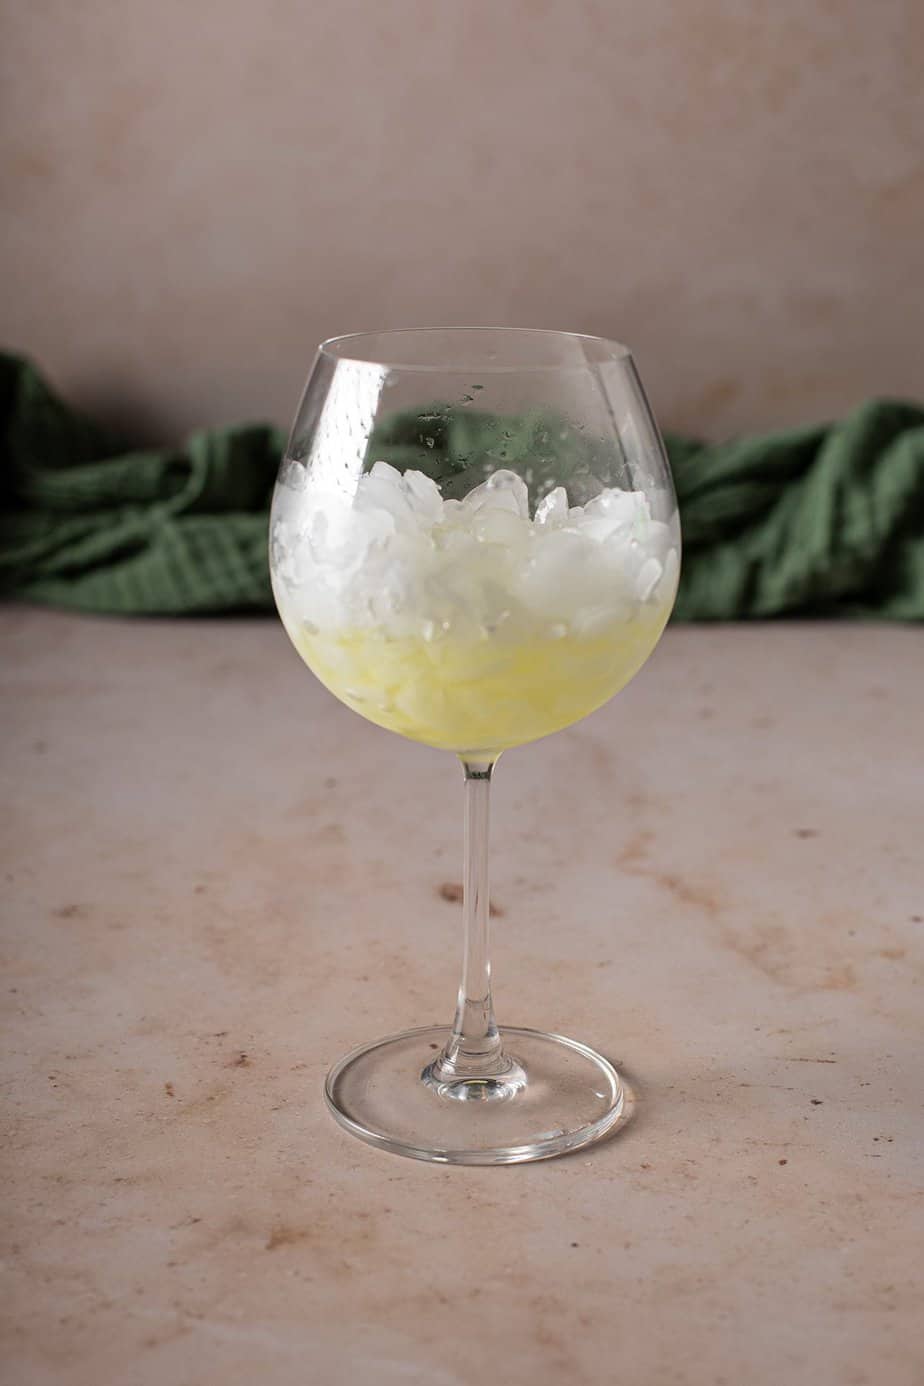 large wine glass filled with crushed ice and some limoncello